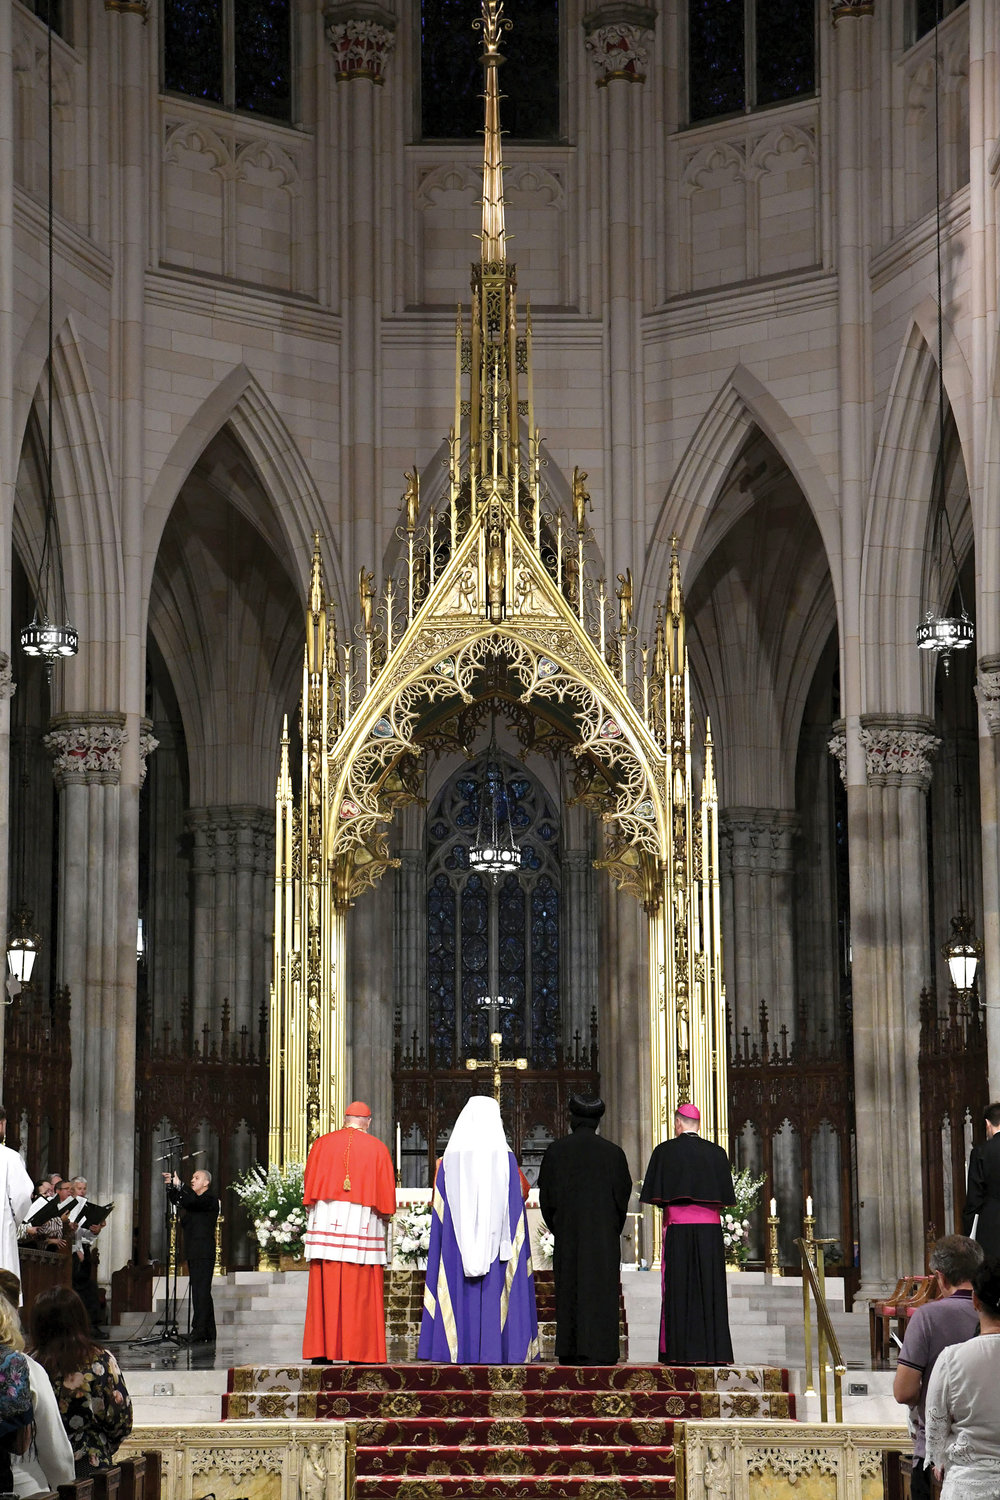 The Archdiocese of New York and the Ukrainian Catholic Archeparchy of Philadelphia offer a Panakhyda (service for the deceased) for the victims of the Russian invasion of Ukraine June 11 at St. Patrick’s Cathedral. Cardinal Dolan and Ukrainian Catholic Archbishop of Philadelphia Borys Gudziak presided. From left are Cardinal Dolan; Archbishop Gudziak; His Grace Bishop David of the Coptic Orthodox Diocese of New York and New England and Auxiliary Bishop Edmund Whalen.